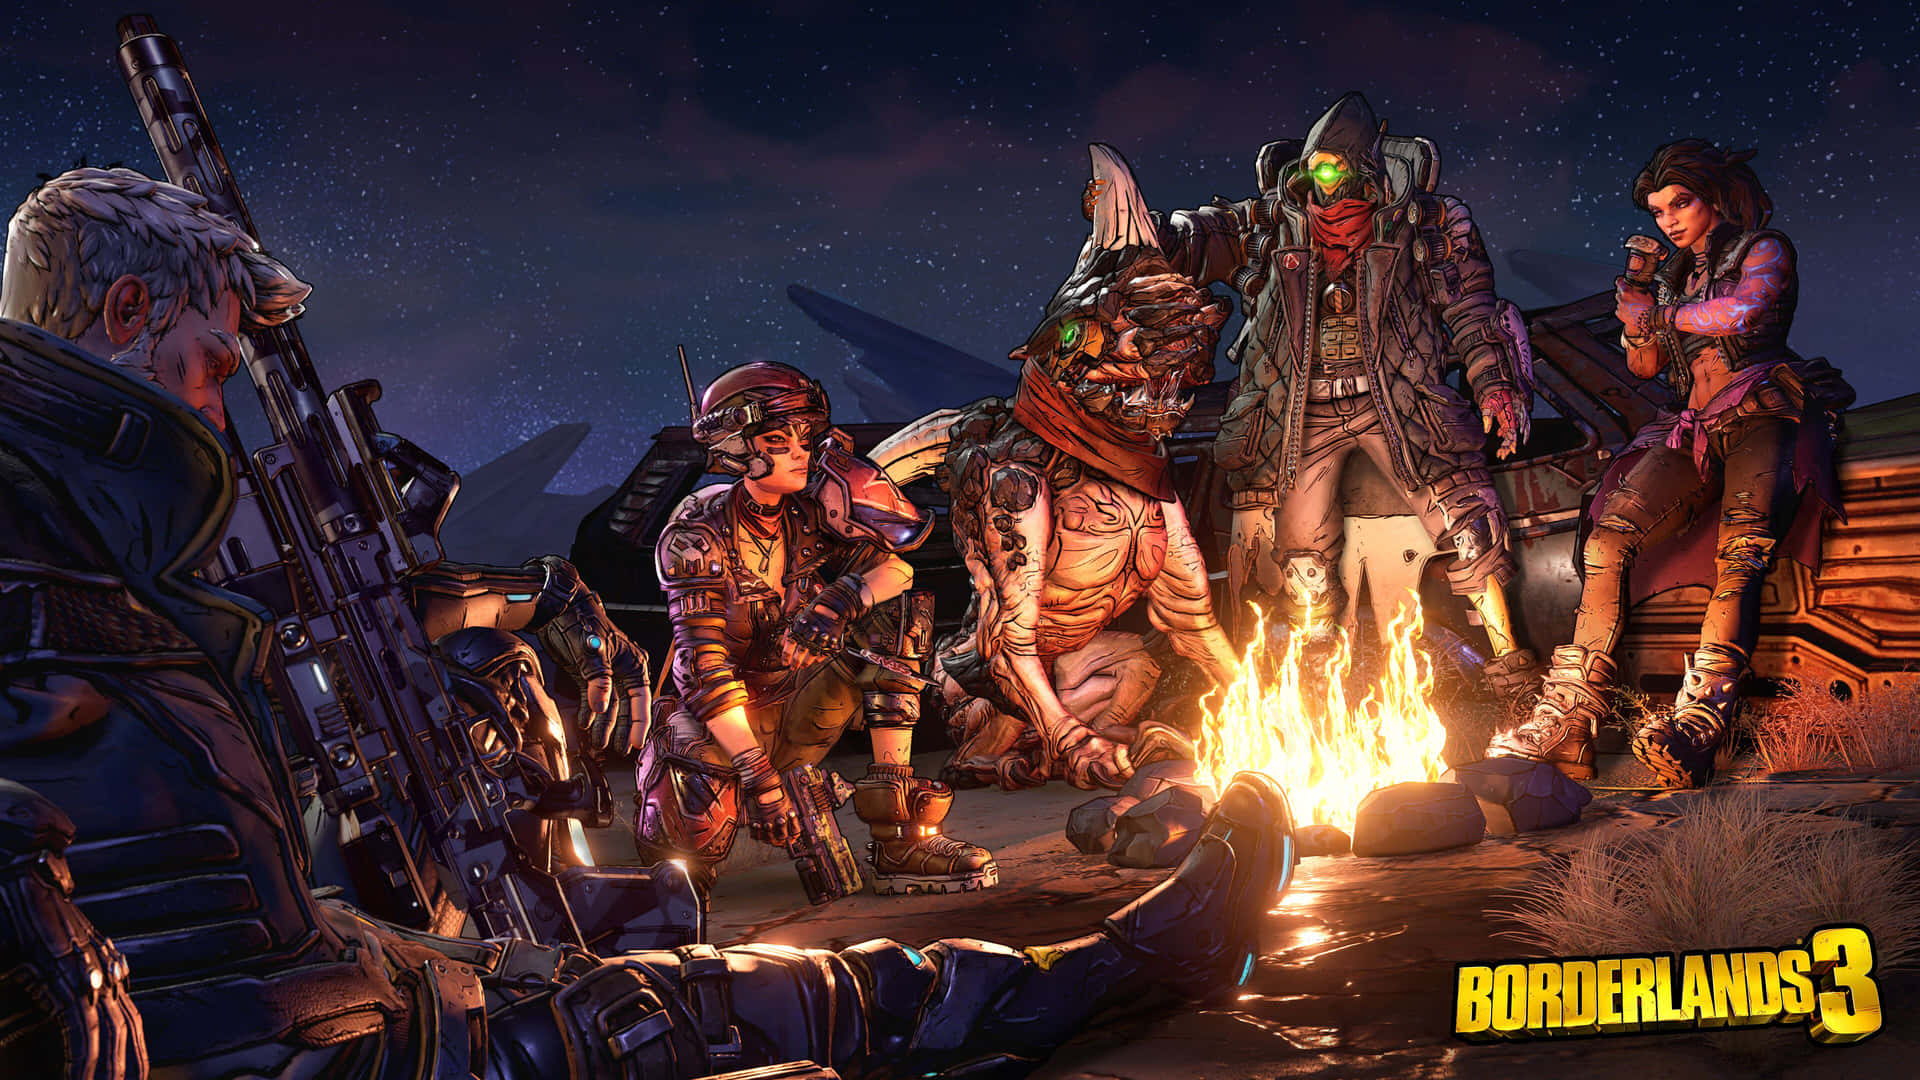 Get Ready for an Action-Packed Adventure with Borderlands 3